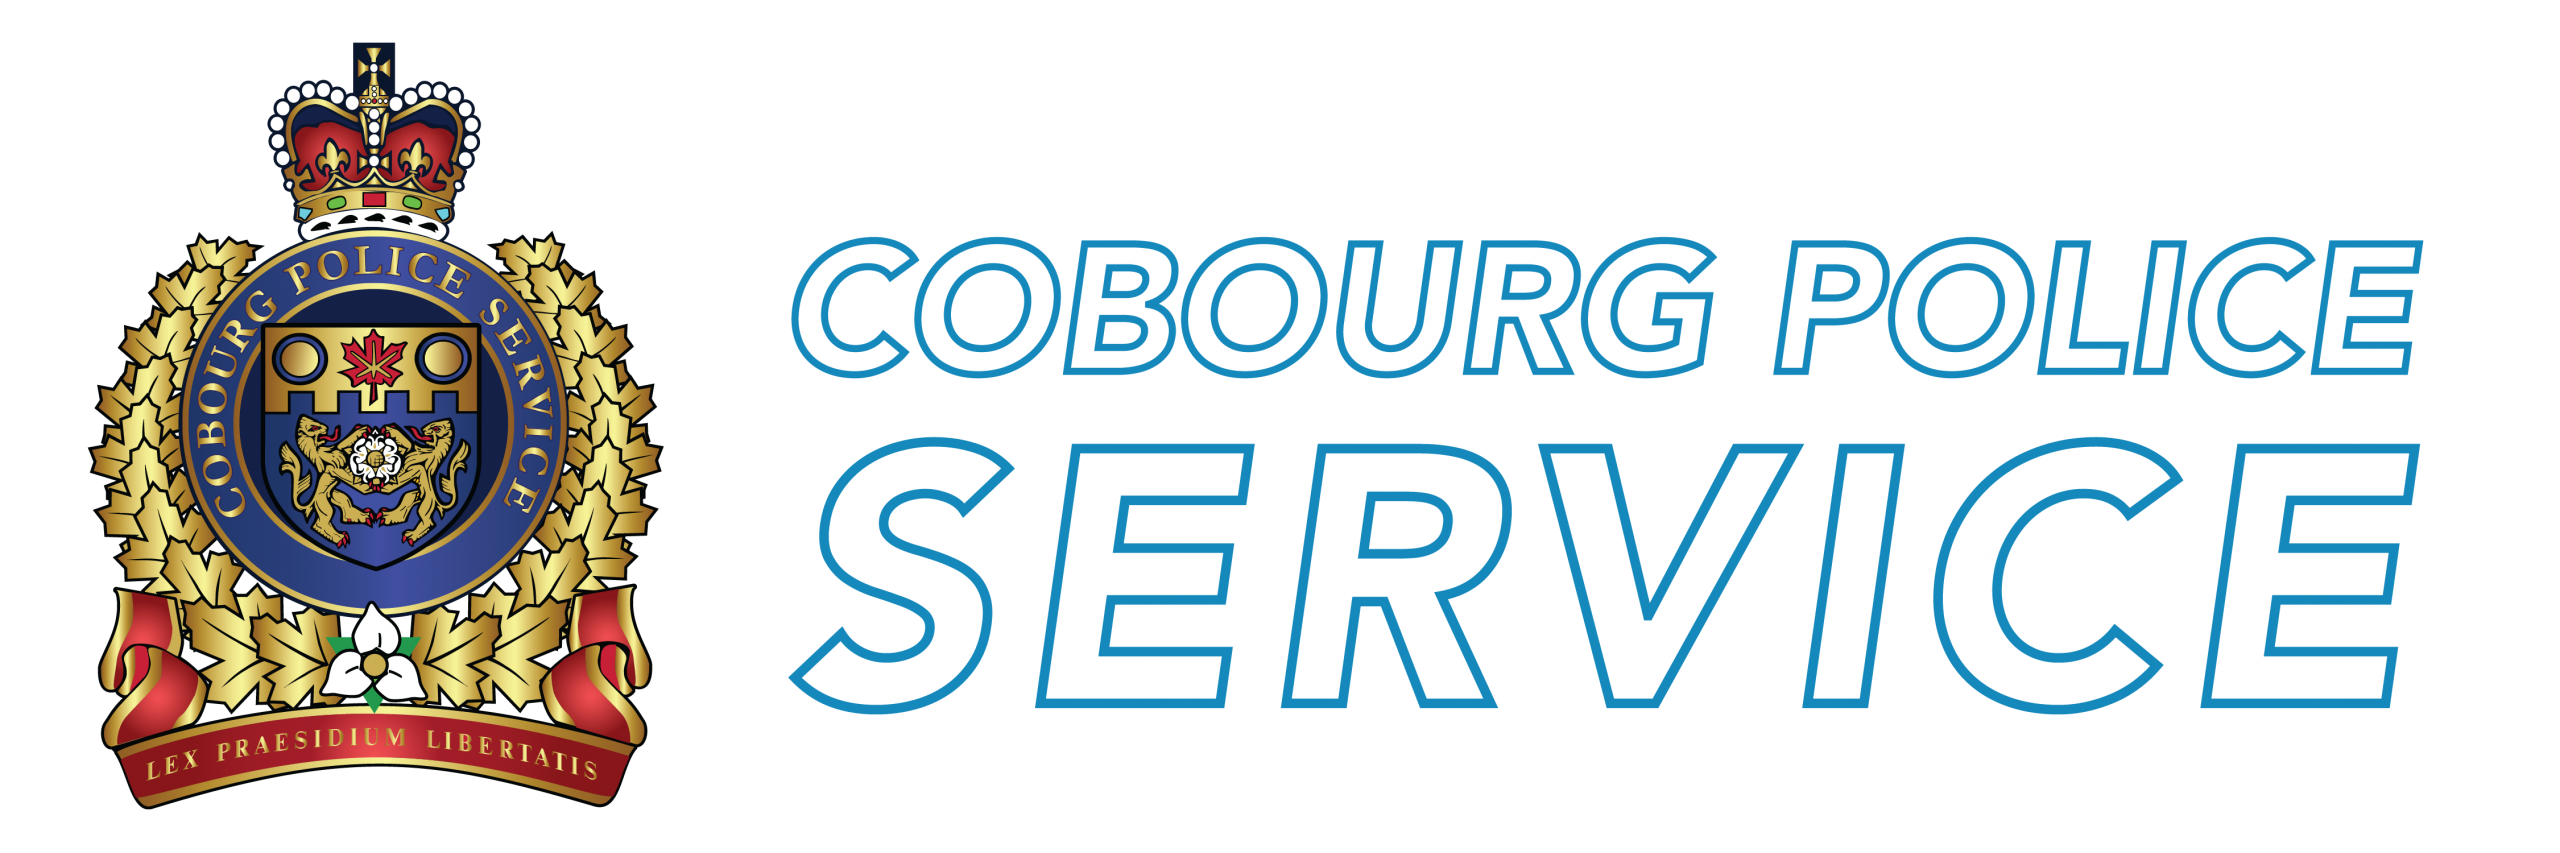 Cobourg Police Services